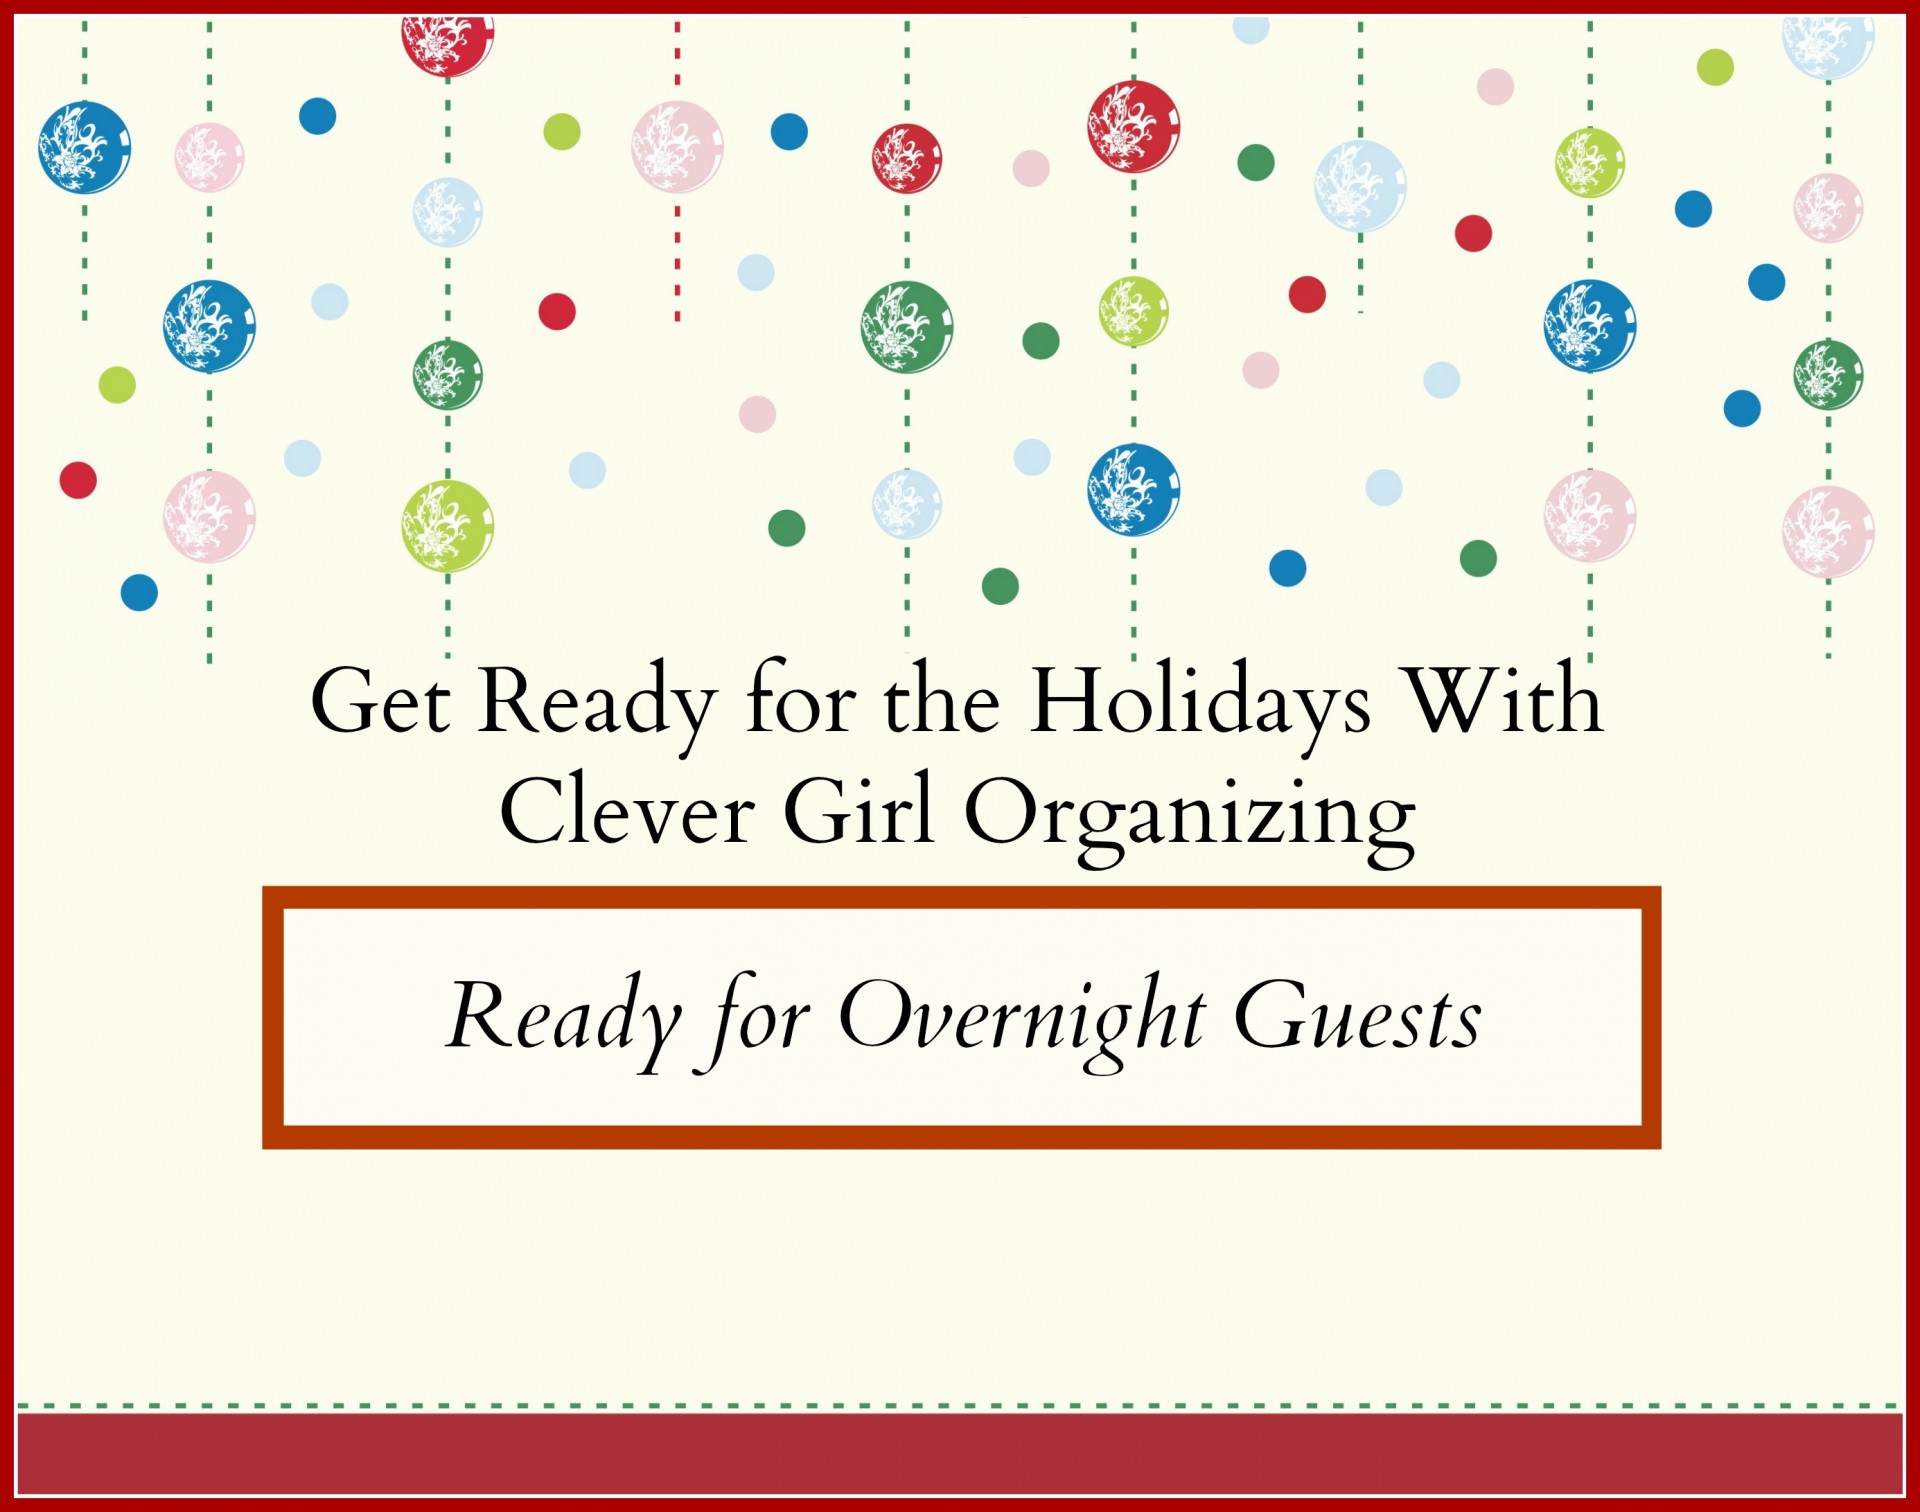 Get Ready for the Holidays: Getting Your Home Ready for Guests